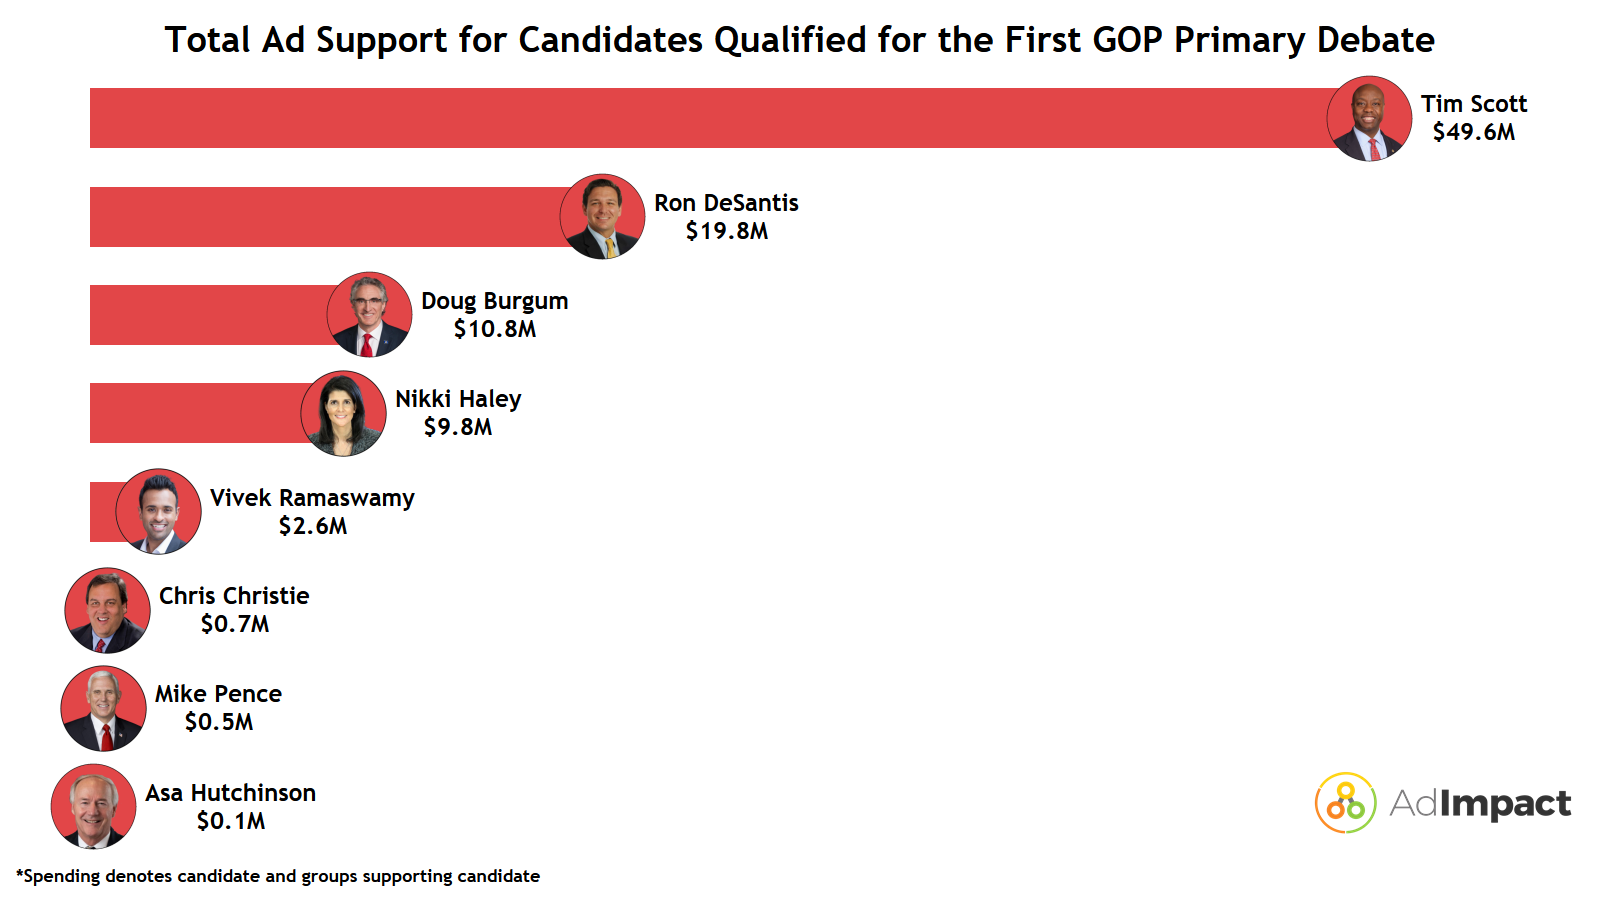 A line chart showing total ad support for debate candidates